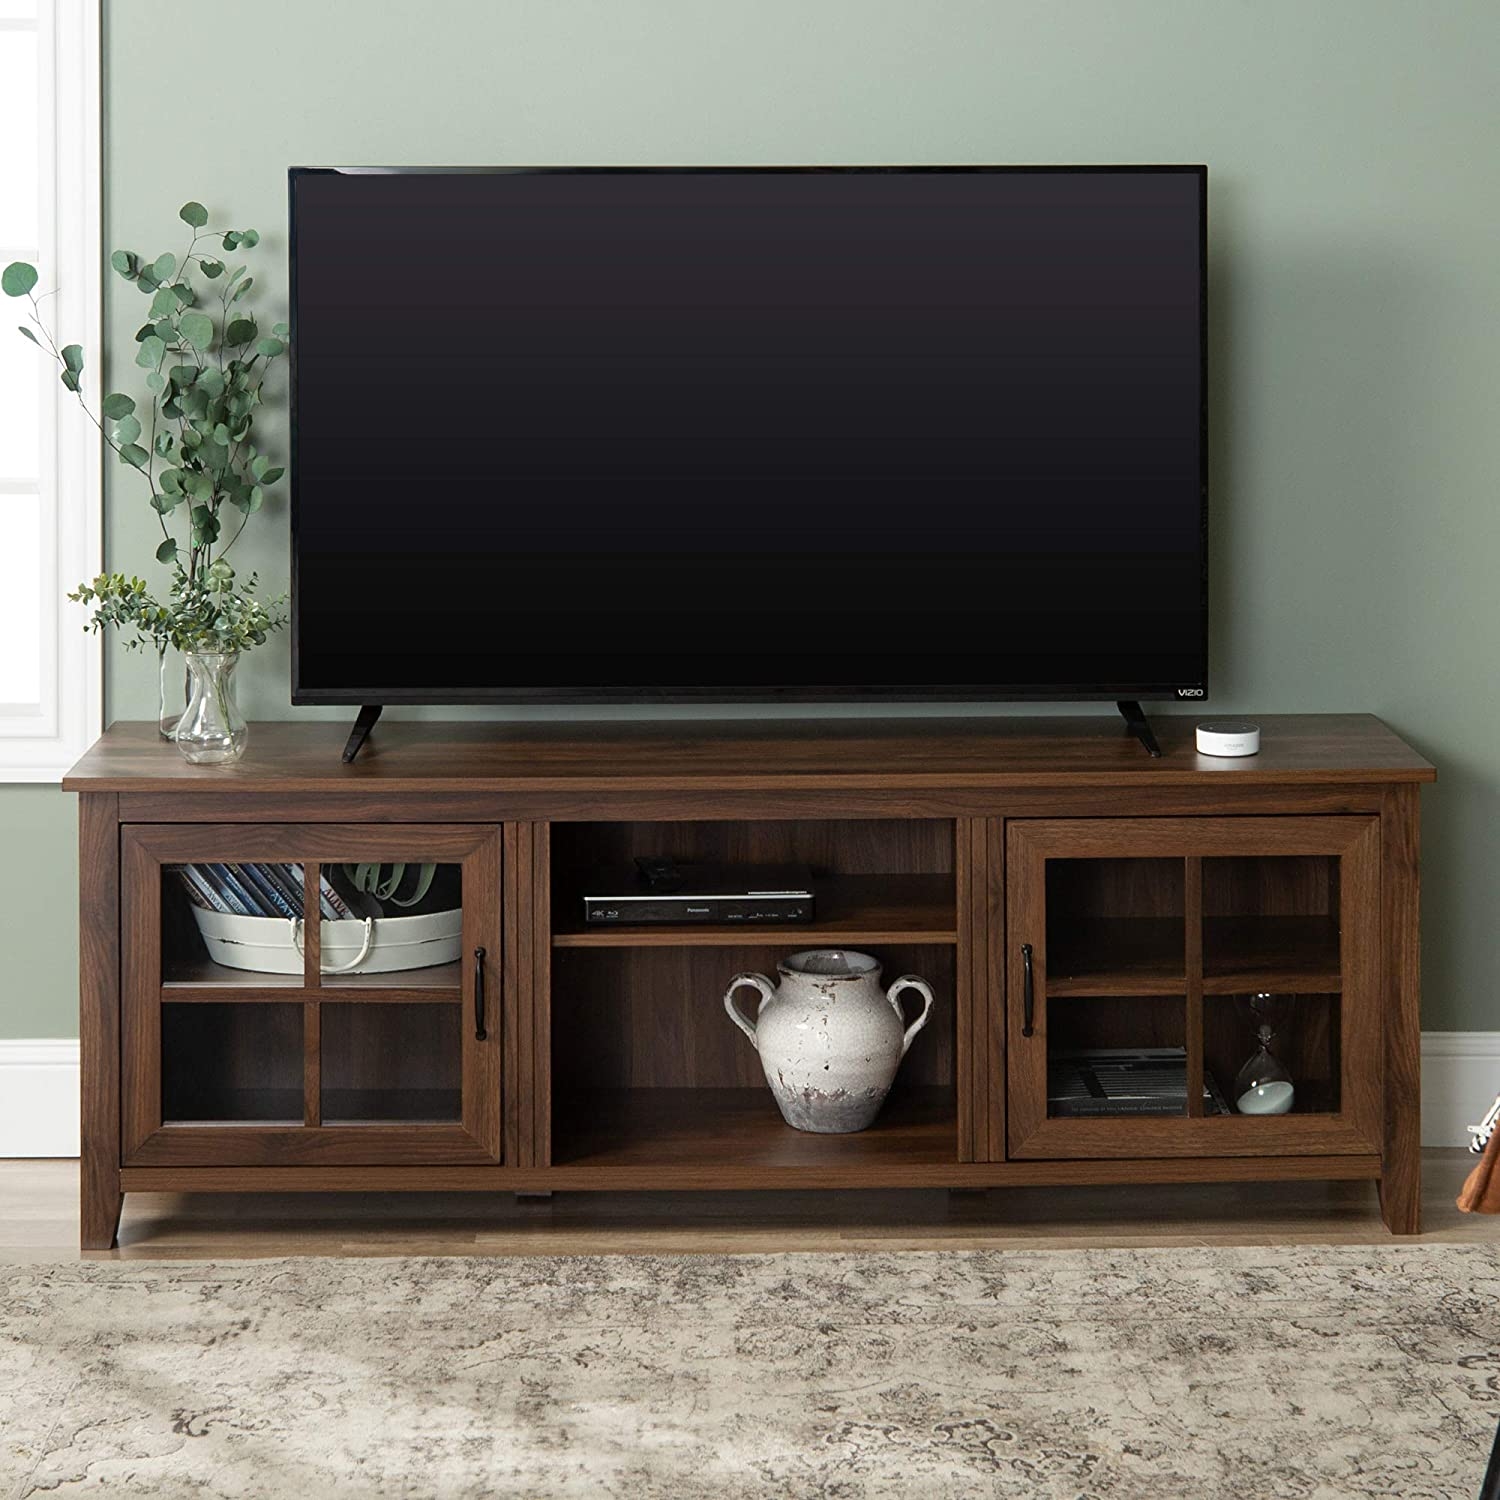 Tv Cabinet With Doors Visualhunt, Entertainment Cabinet With Doors Small